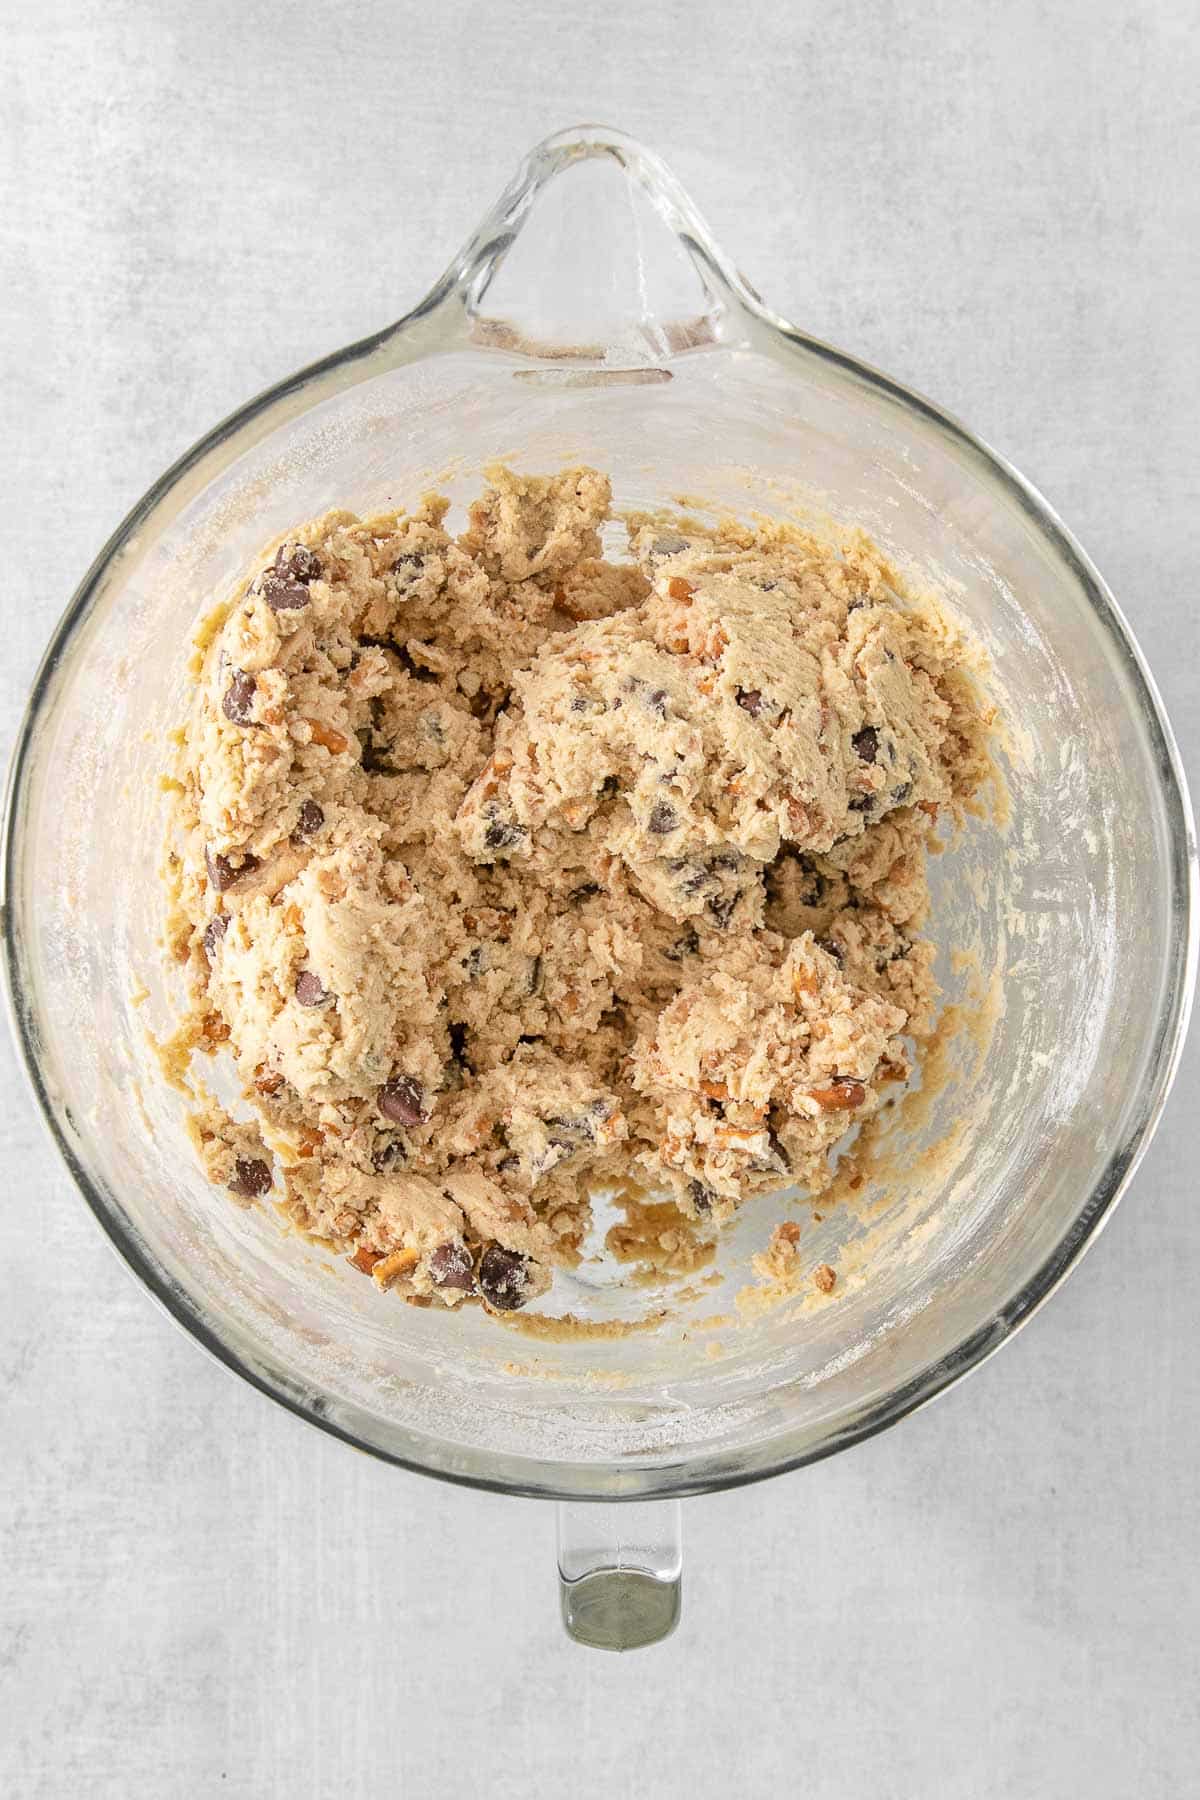 Chocolate chips and pretzels added to cookie dough in a glass bowl.